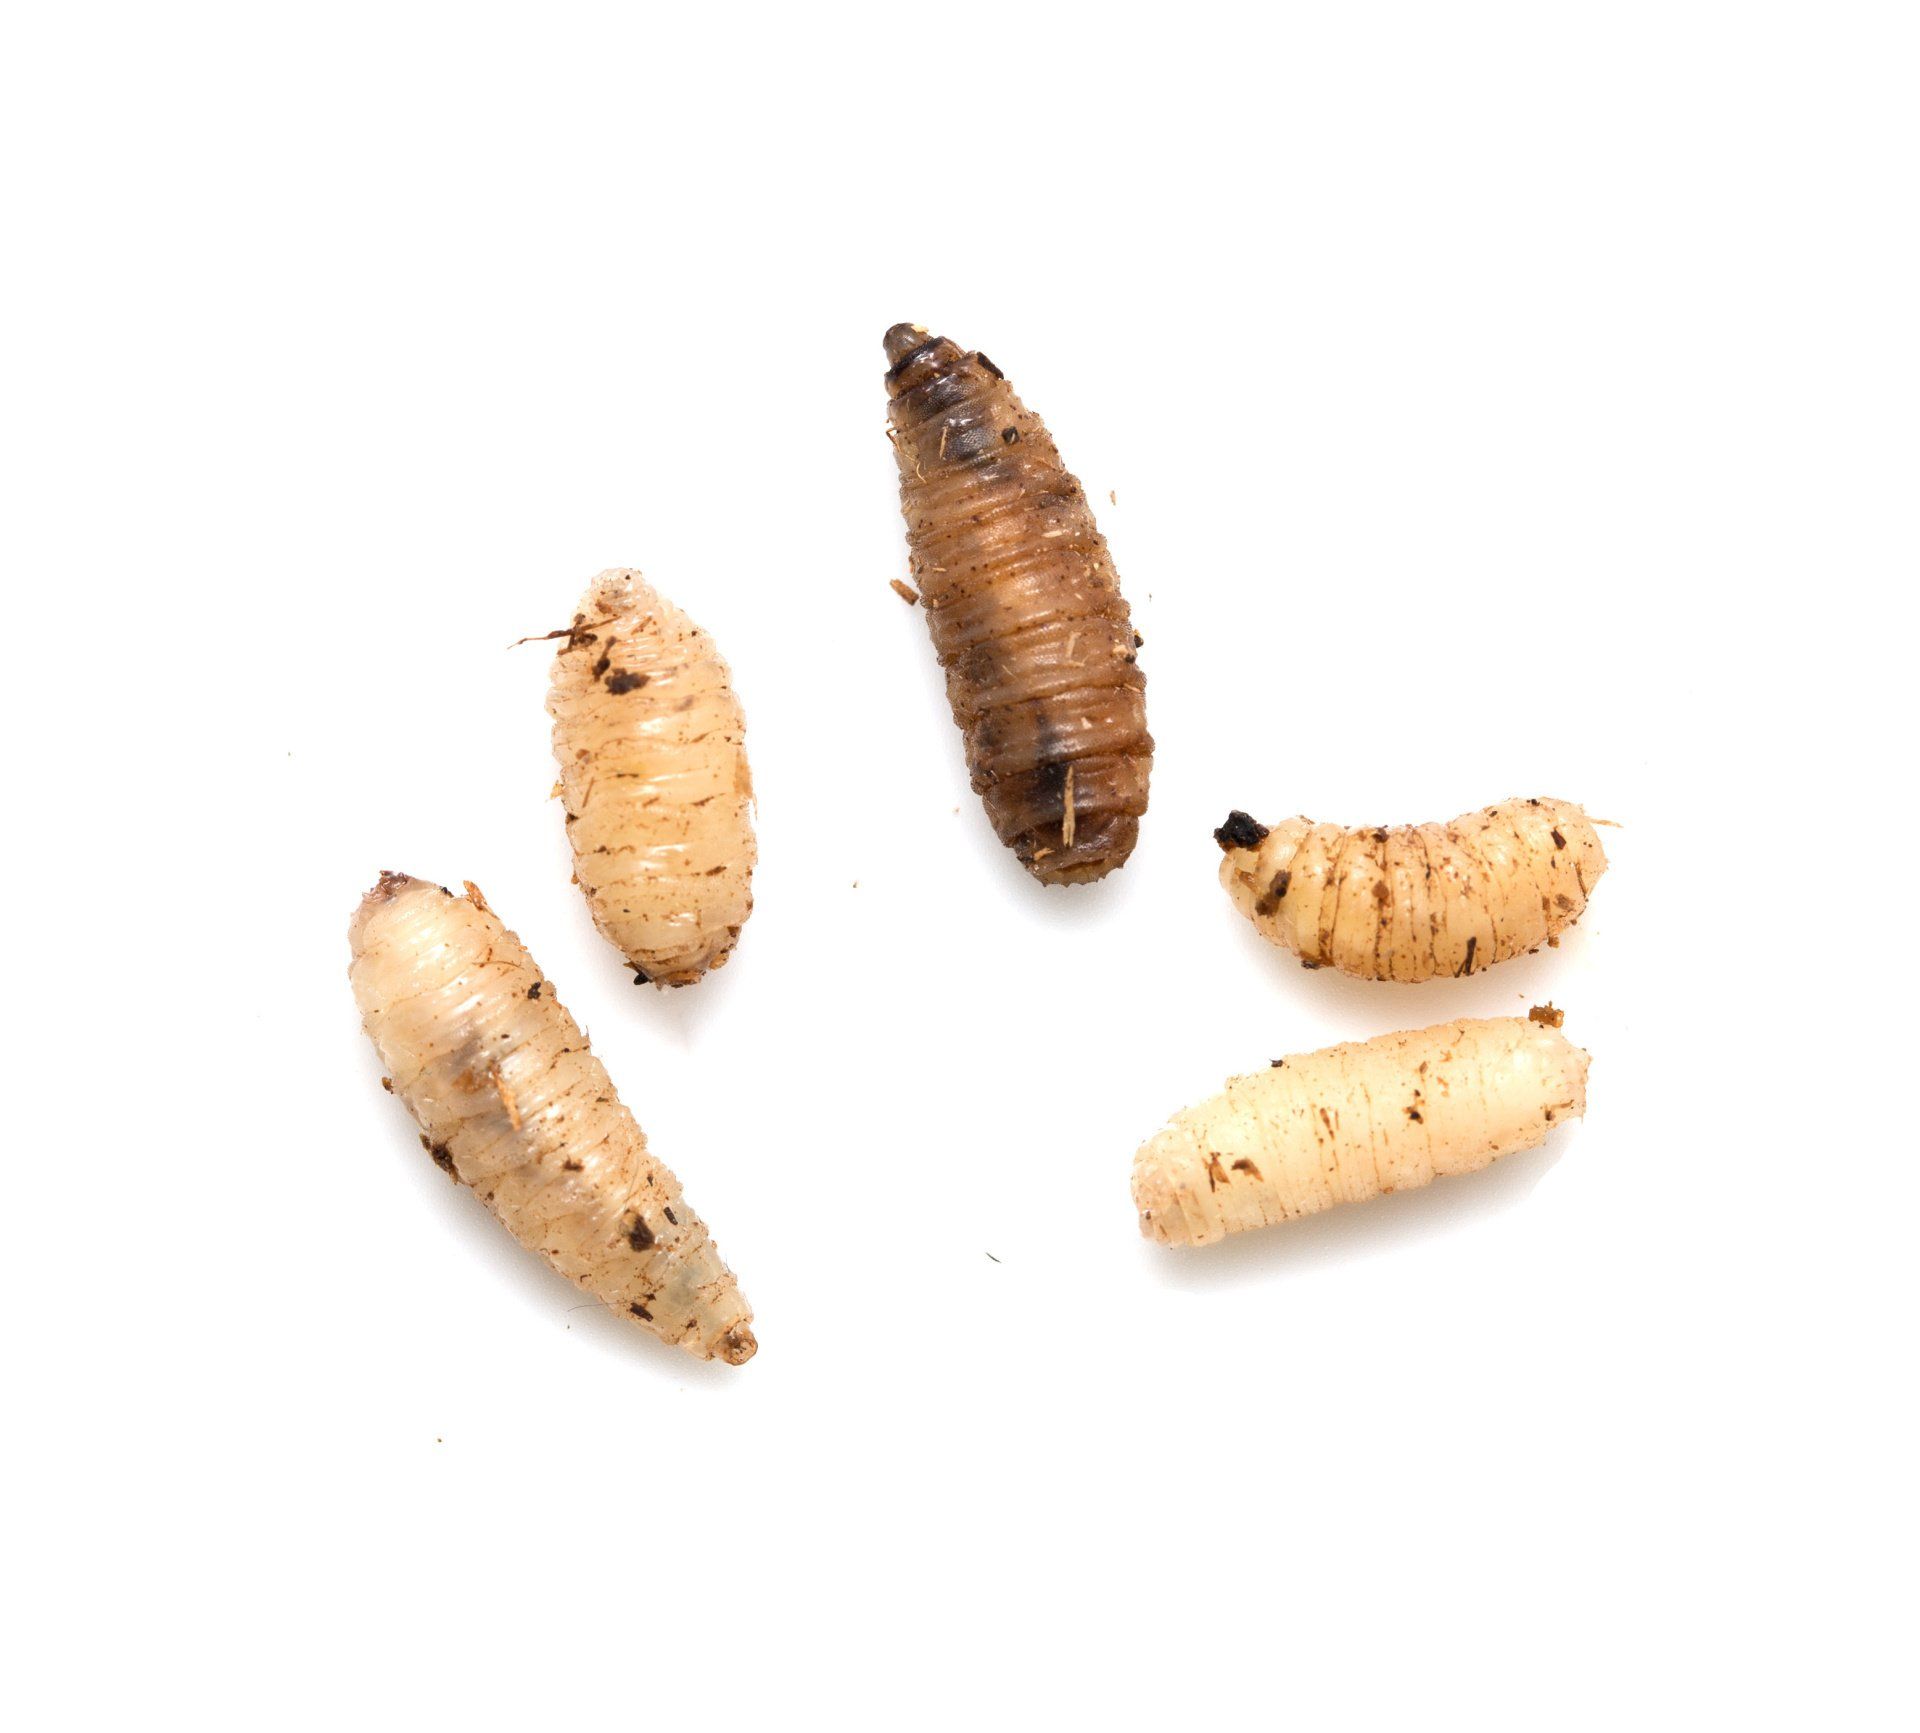 Where Do Maggots Come from and How to Get Rid of Them